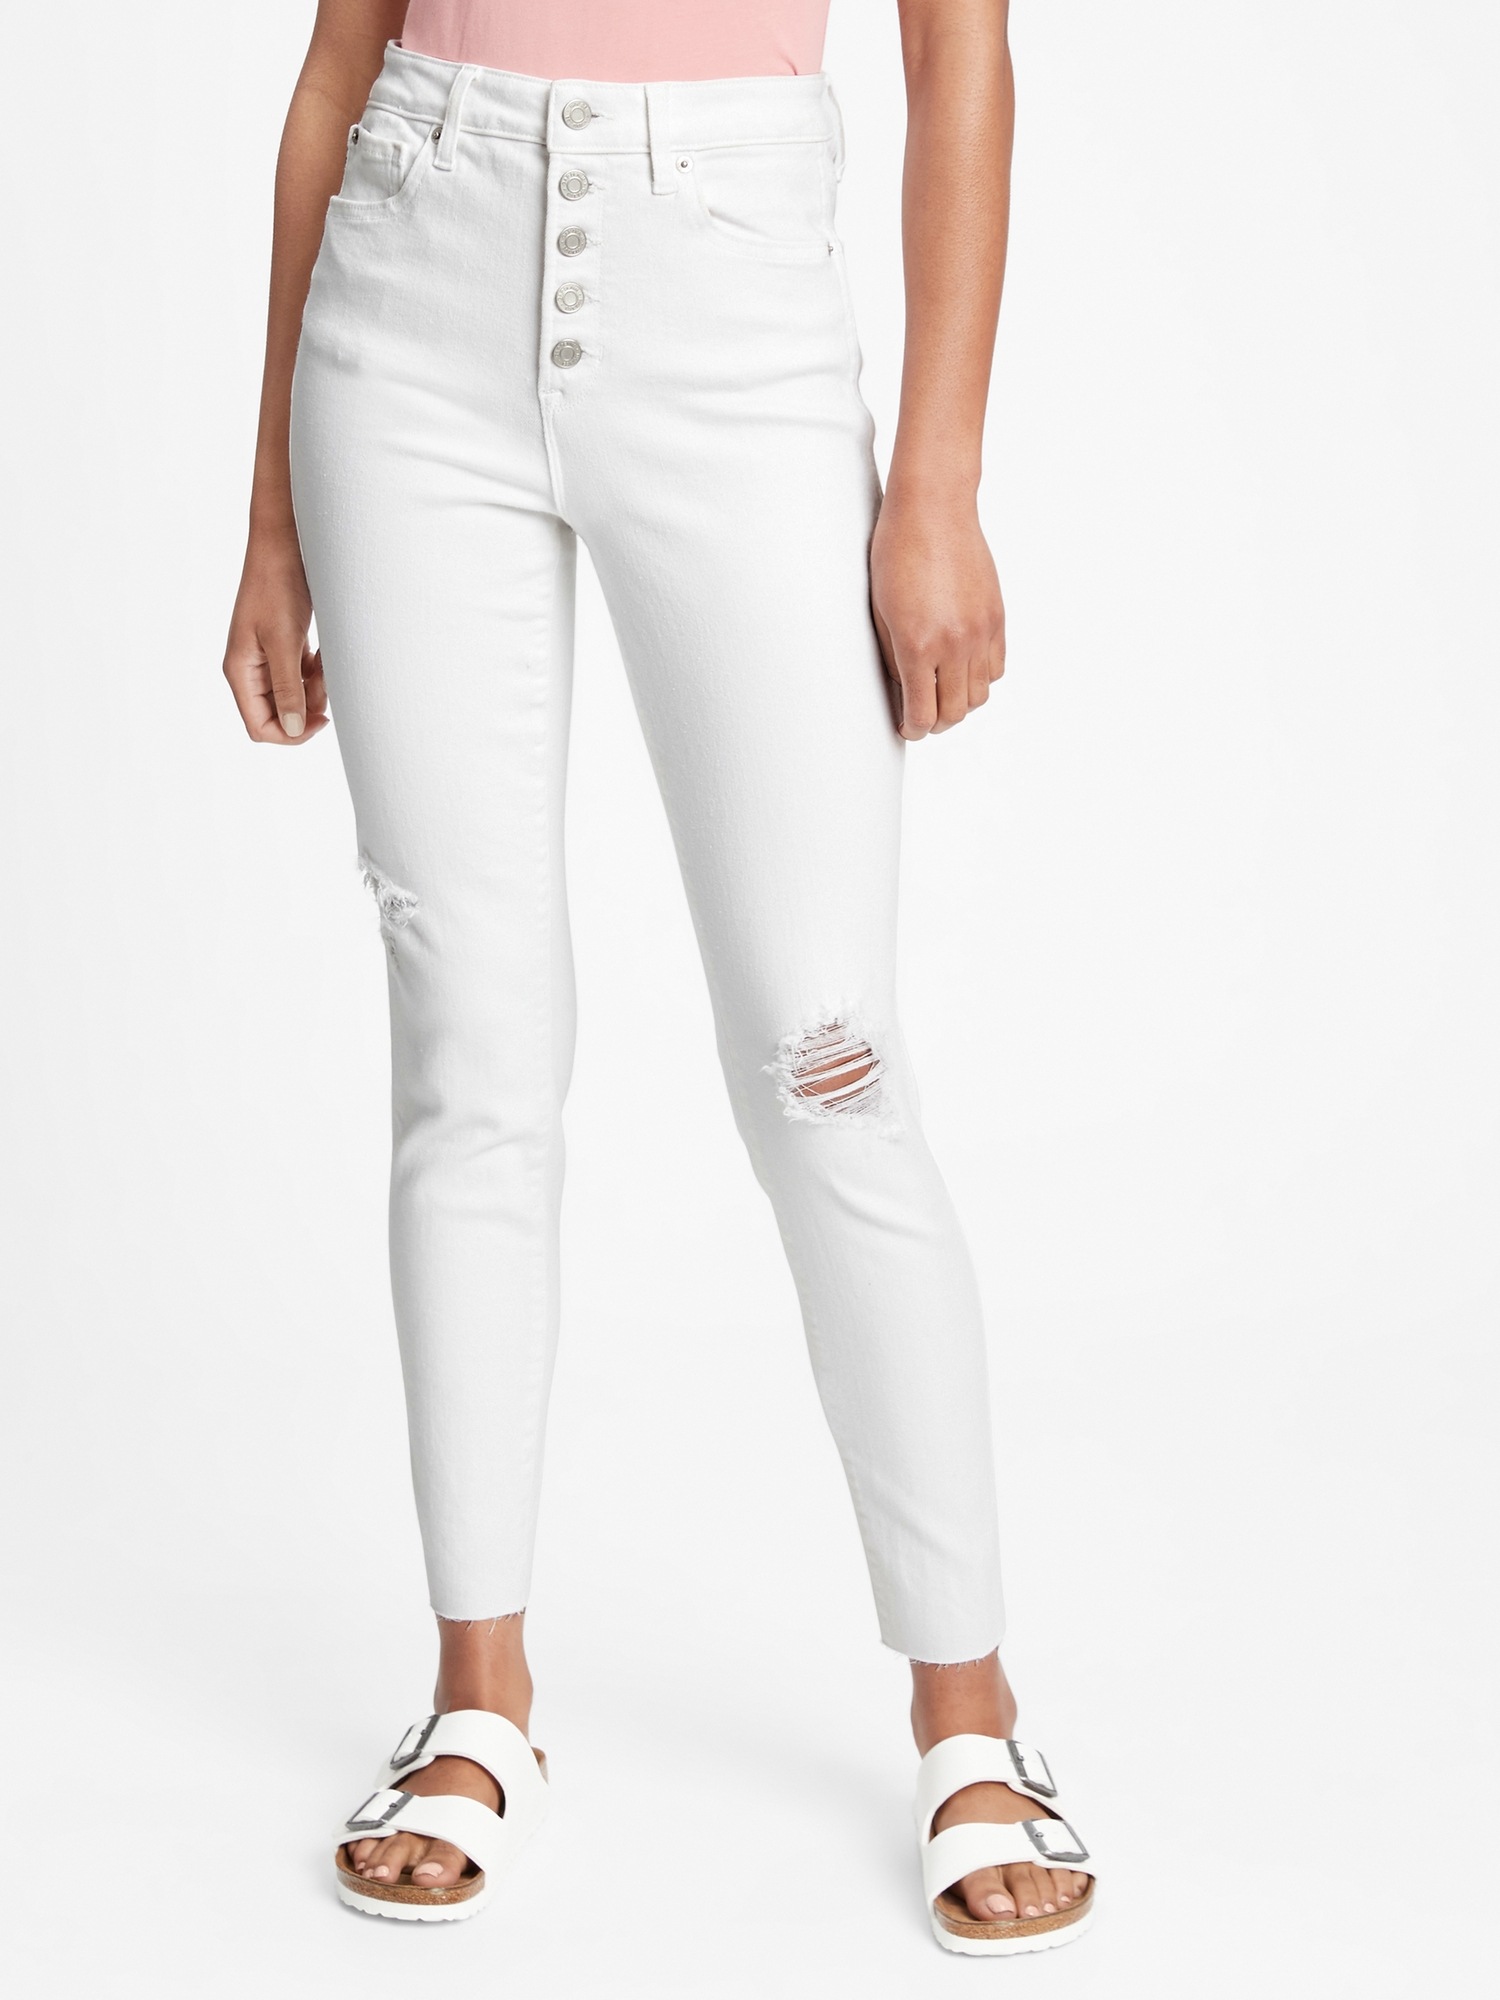 High Rise Destructed Universal Legging Jeans with Washwell | Gap Factory